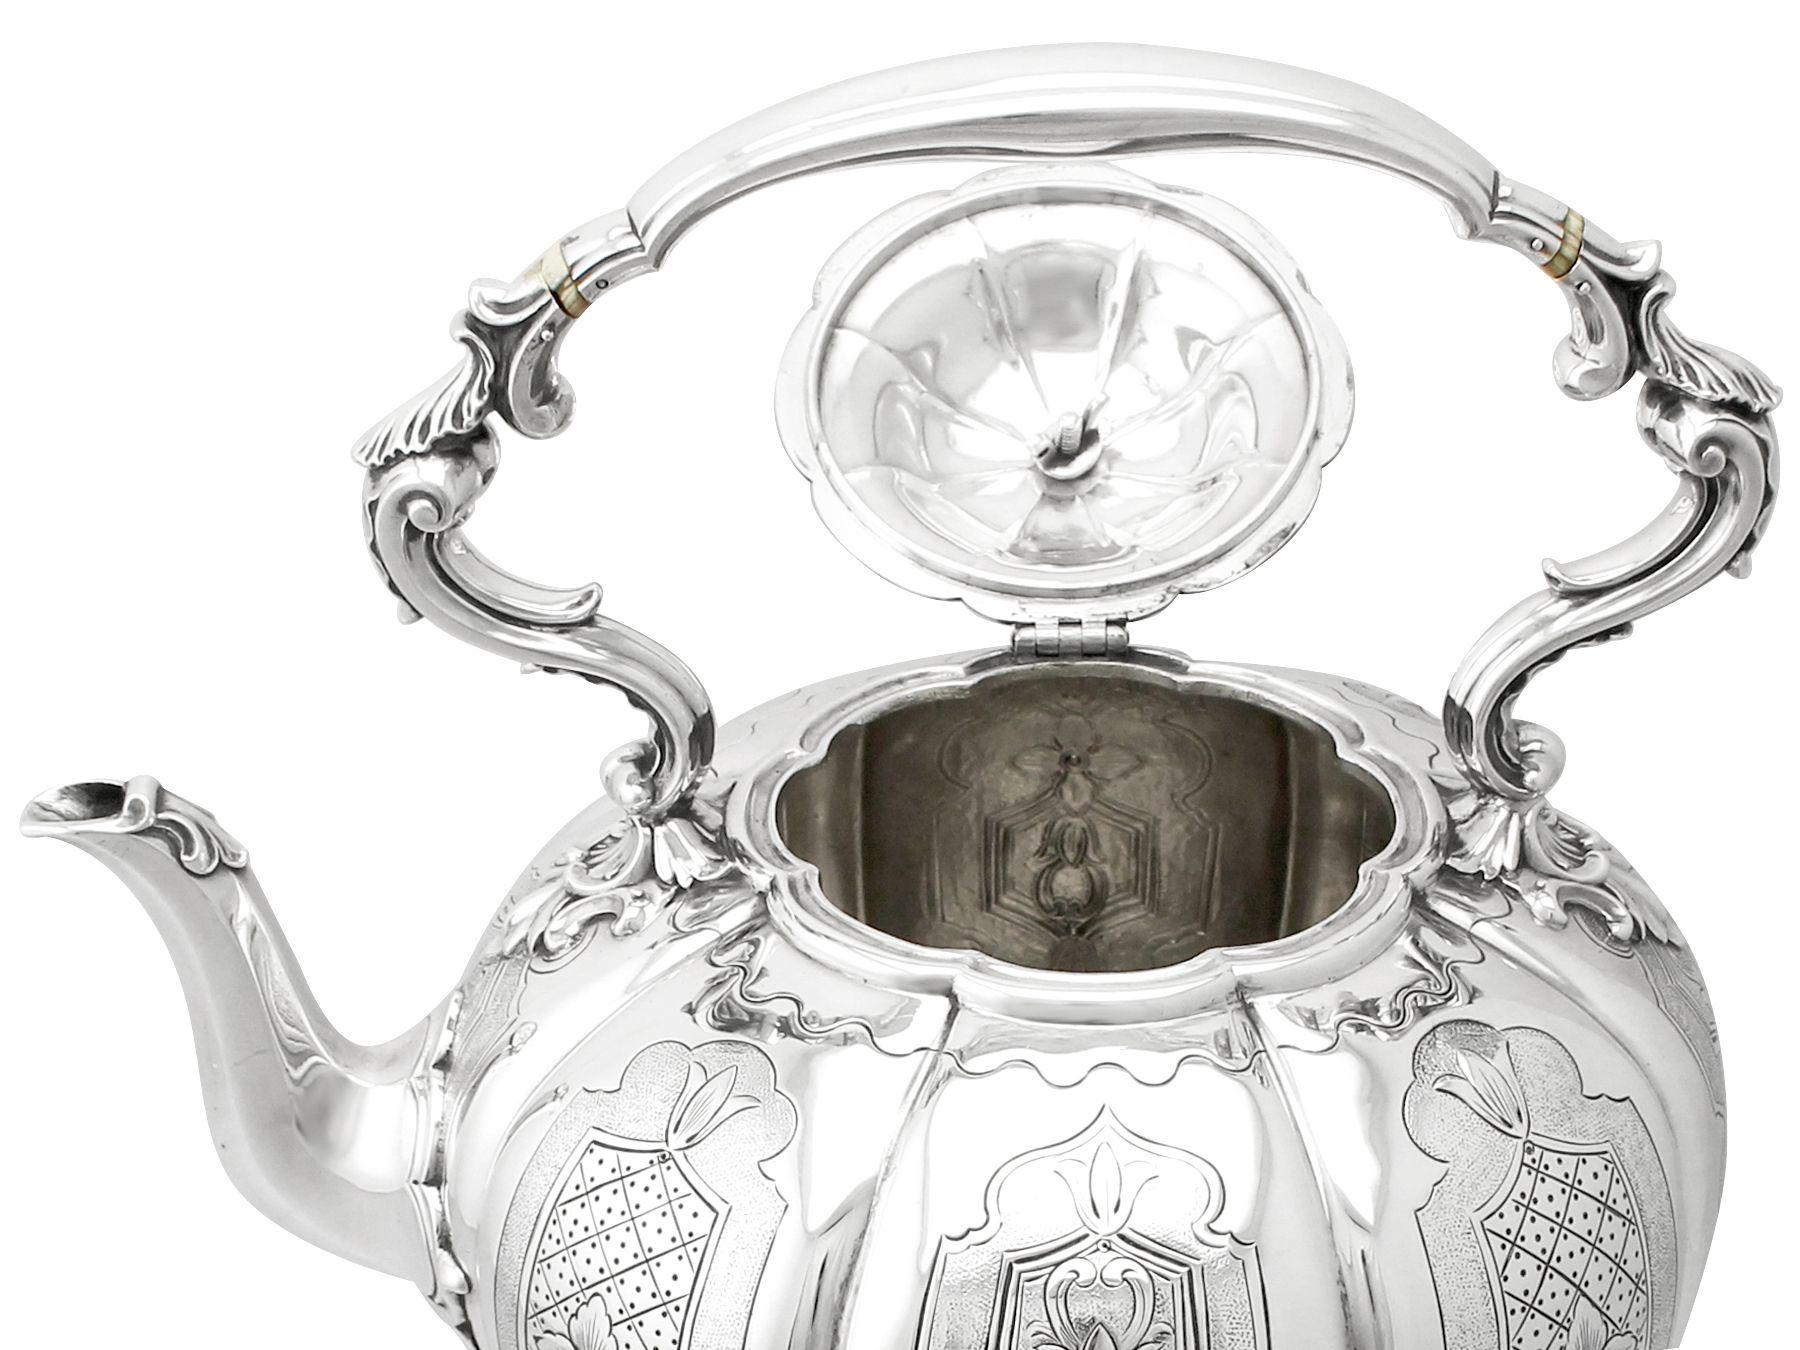 Antique Victorian Sterling Silver Spirit Kettle In Excellent Condition For Sale In Jesmond, Newcastle Upon Tyne